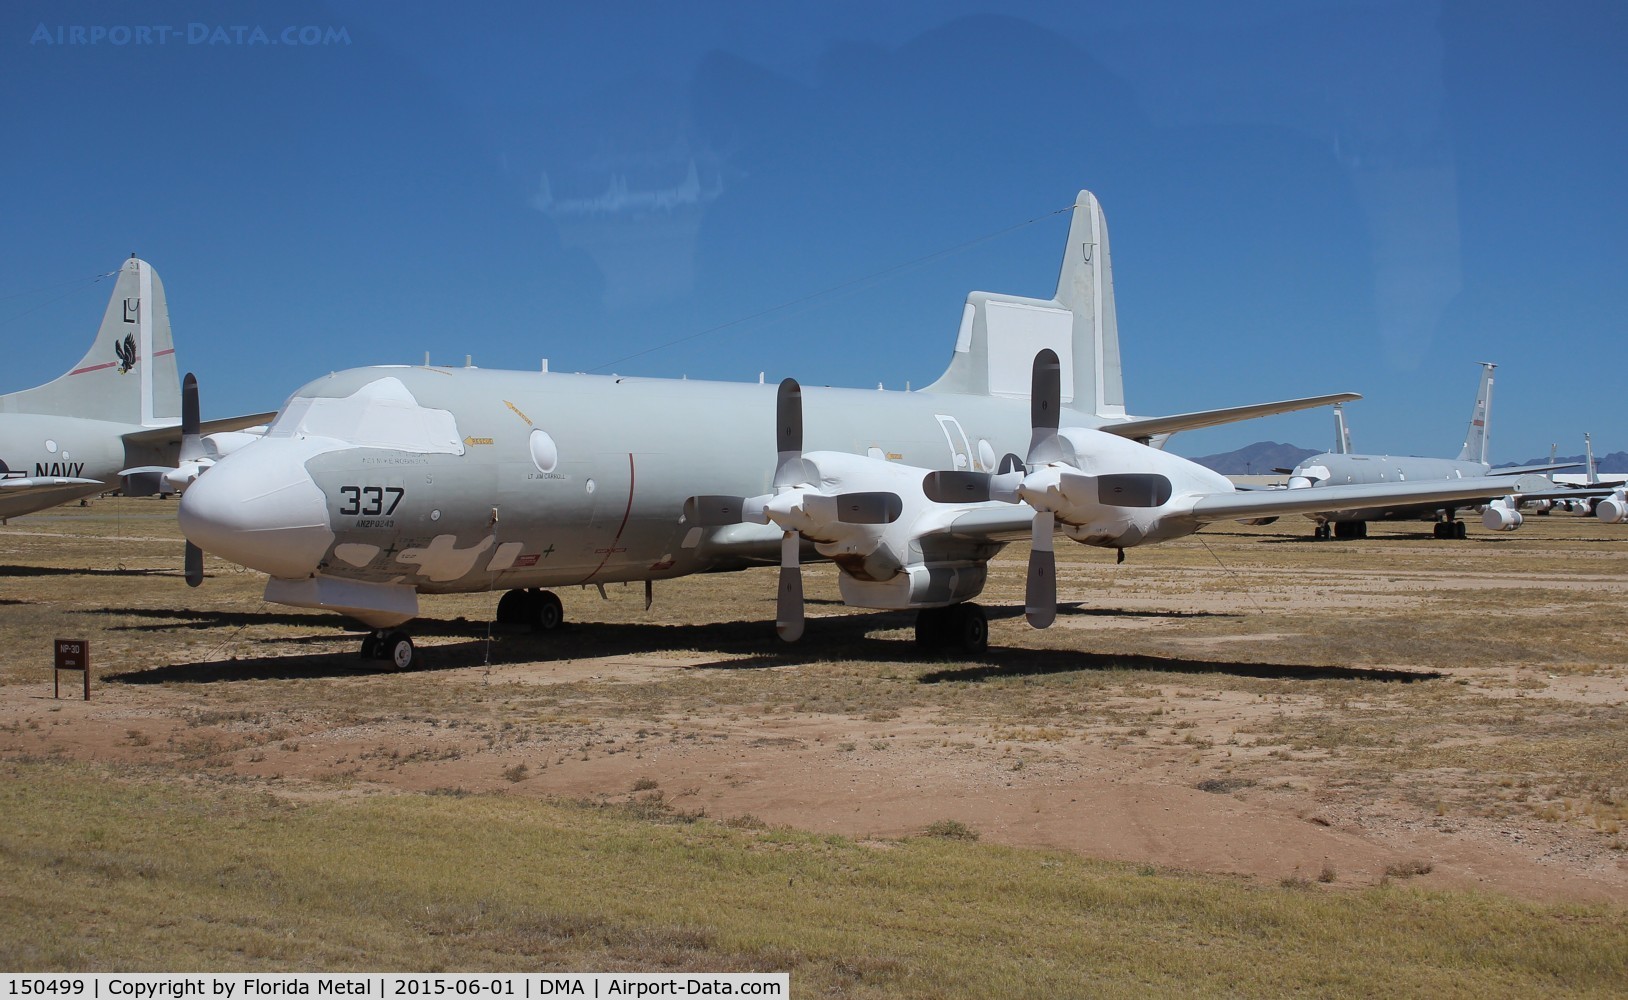 150499, Lockheed NP-3D Orion C/N 185-5025, NP-3D Orion